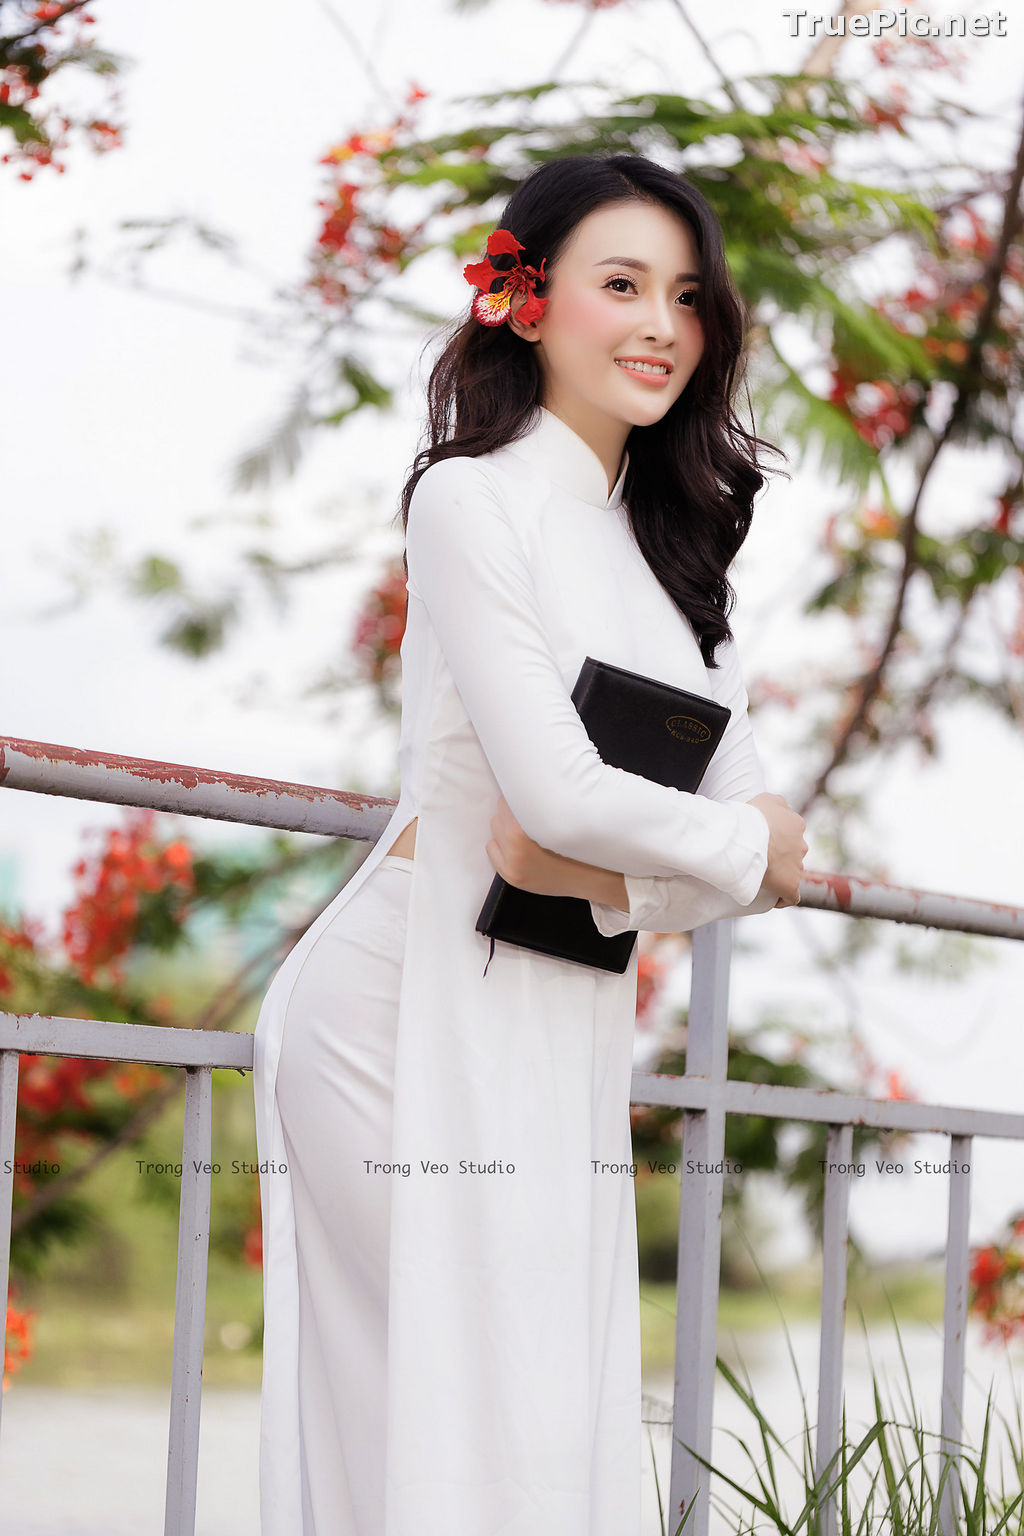 Image The Beauty of Vietnamese Girls with Traditional Dress (Ao Dai) #3 - TruePic.net - Picture-43